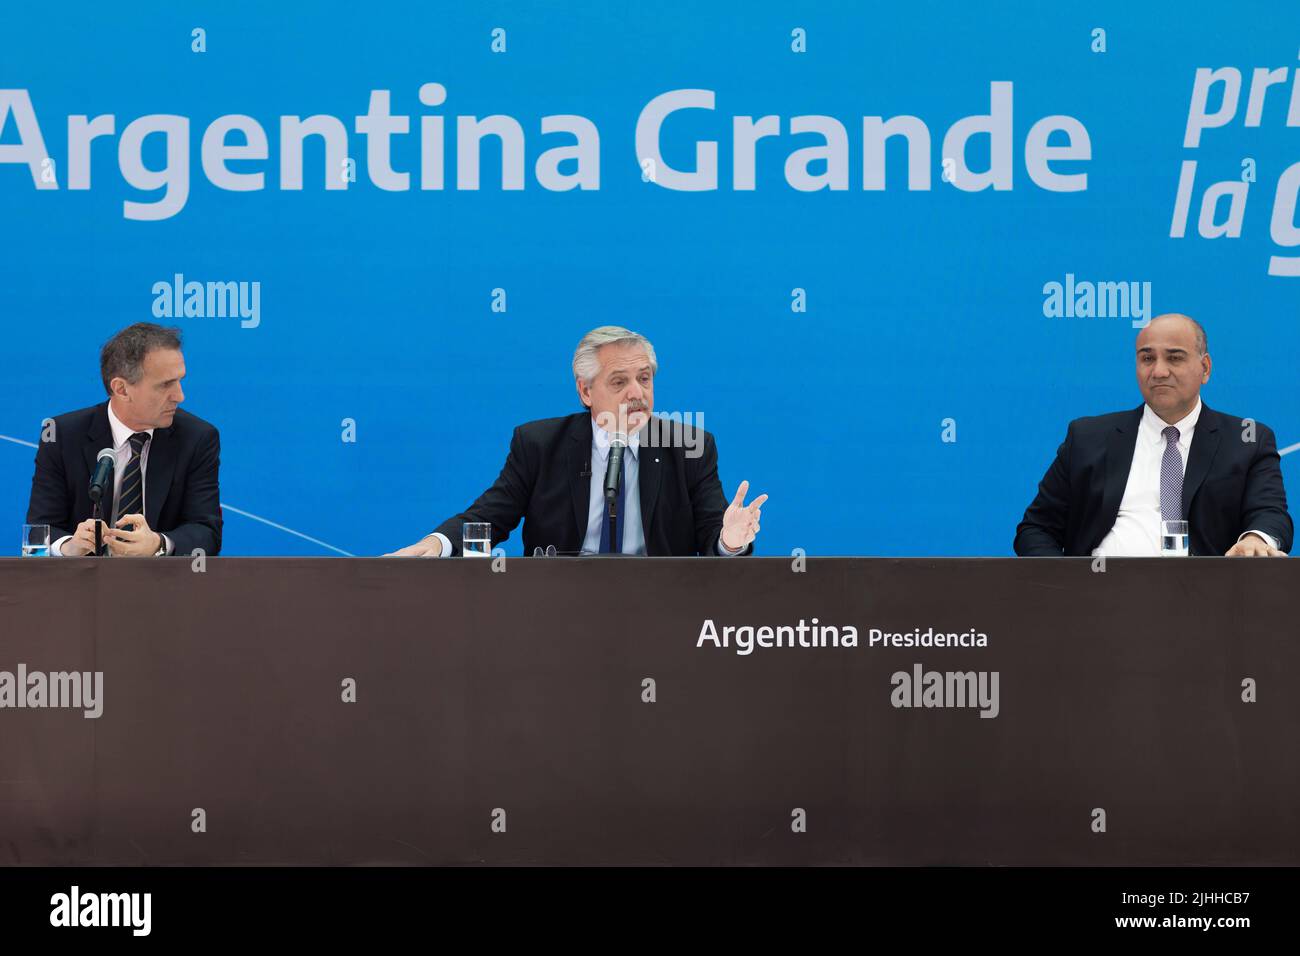 Buenos Aires, 18th July 2022. President Alberto Fernández led the presentation of Argentina Grande, Infrastructure Plan for the Development of the Nation, together with the Minister of Public Works, Gabriel Katopodis and the Chief of the Cabinet of Ministers Juan Manzur (Credit: Esteban Osorio/Alamy Live News) Stock Photo